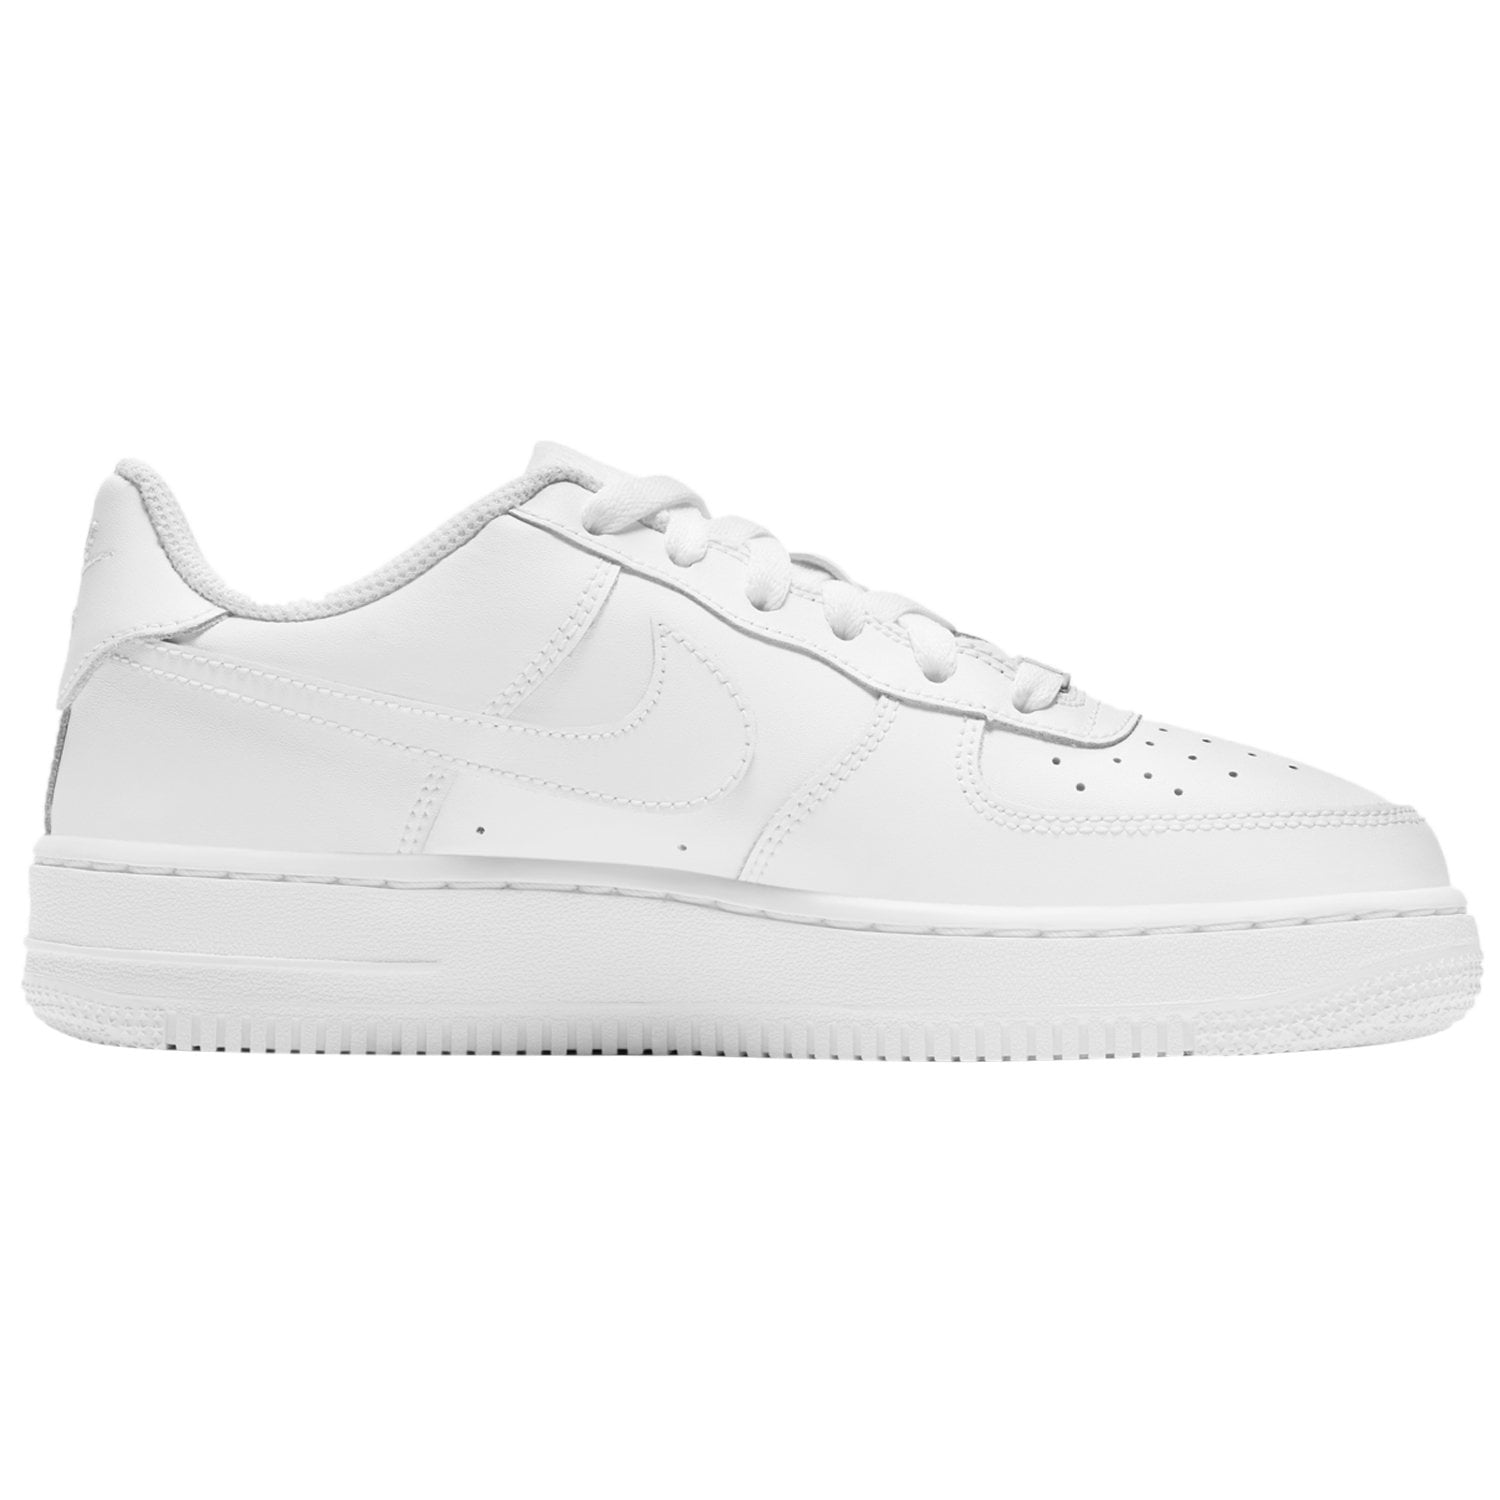 walmart knock off air forces